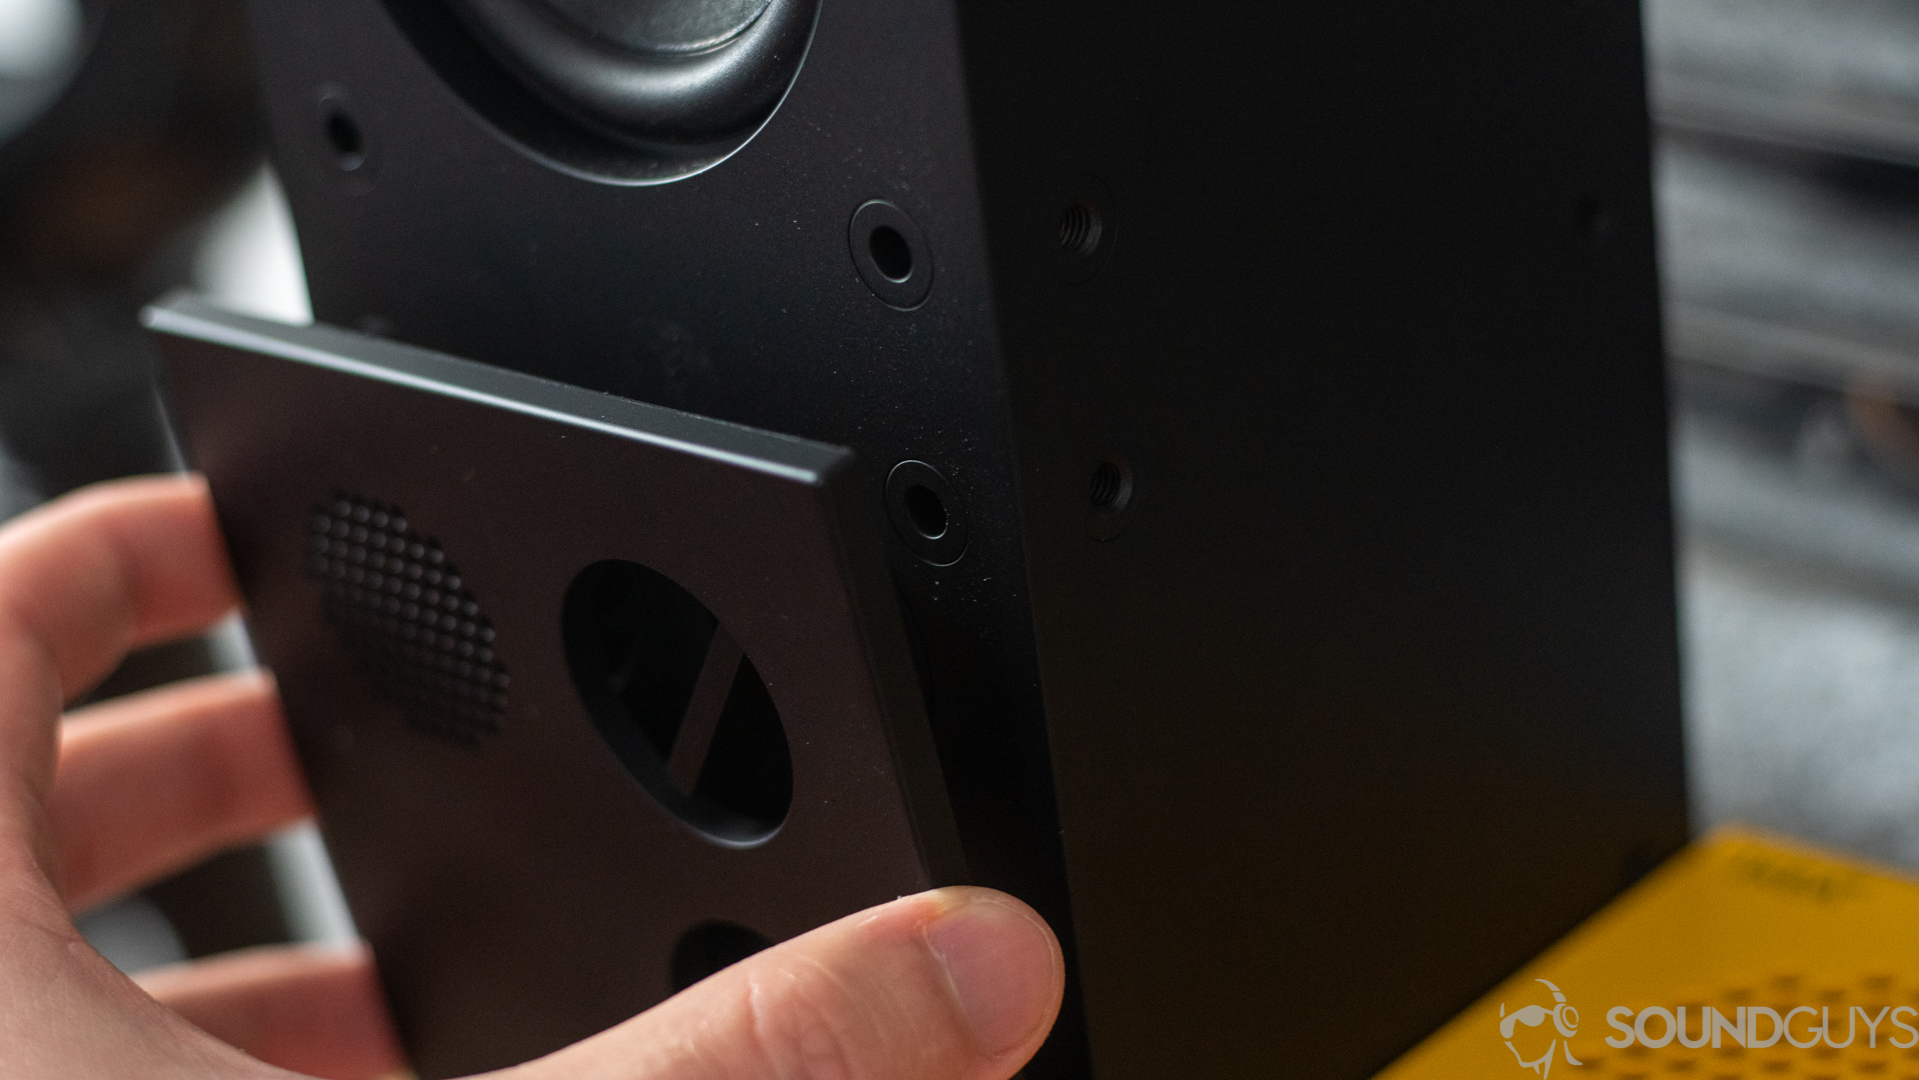 Close-up of man taking off the removable front grille of the Frekvens speaker.